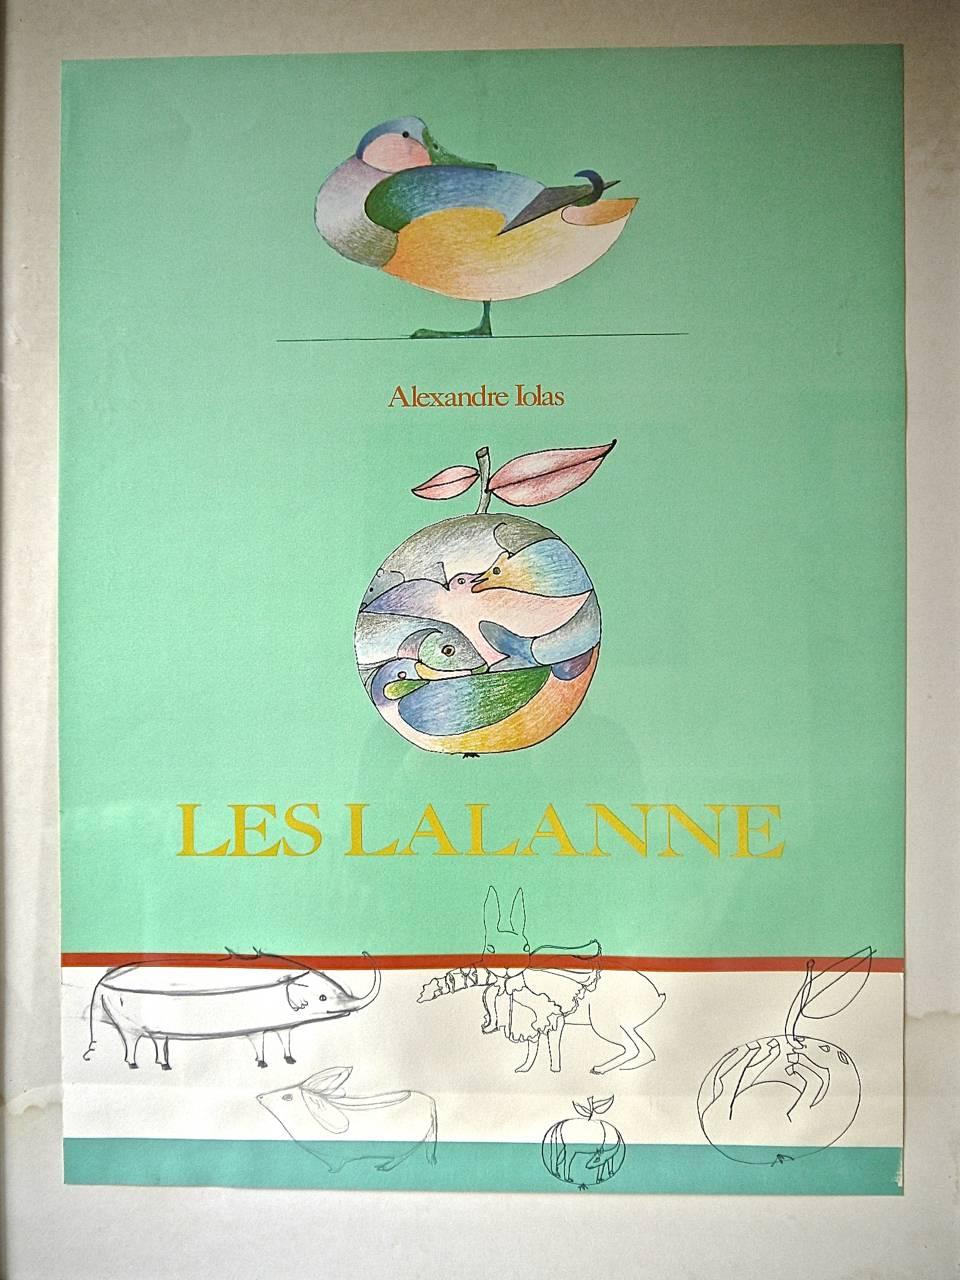 Colourful poster by the artists Claude and Francois-Xavier Lalanne known as Les Lalanne, circa 1970s. A bright coloured duck and birds and fish incased in an apple on a green ground with different animalier drawings underneath.
Watermark on the